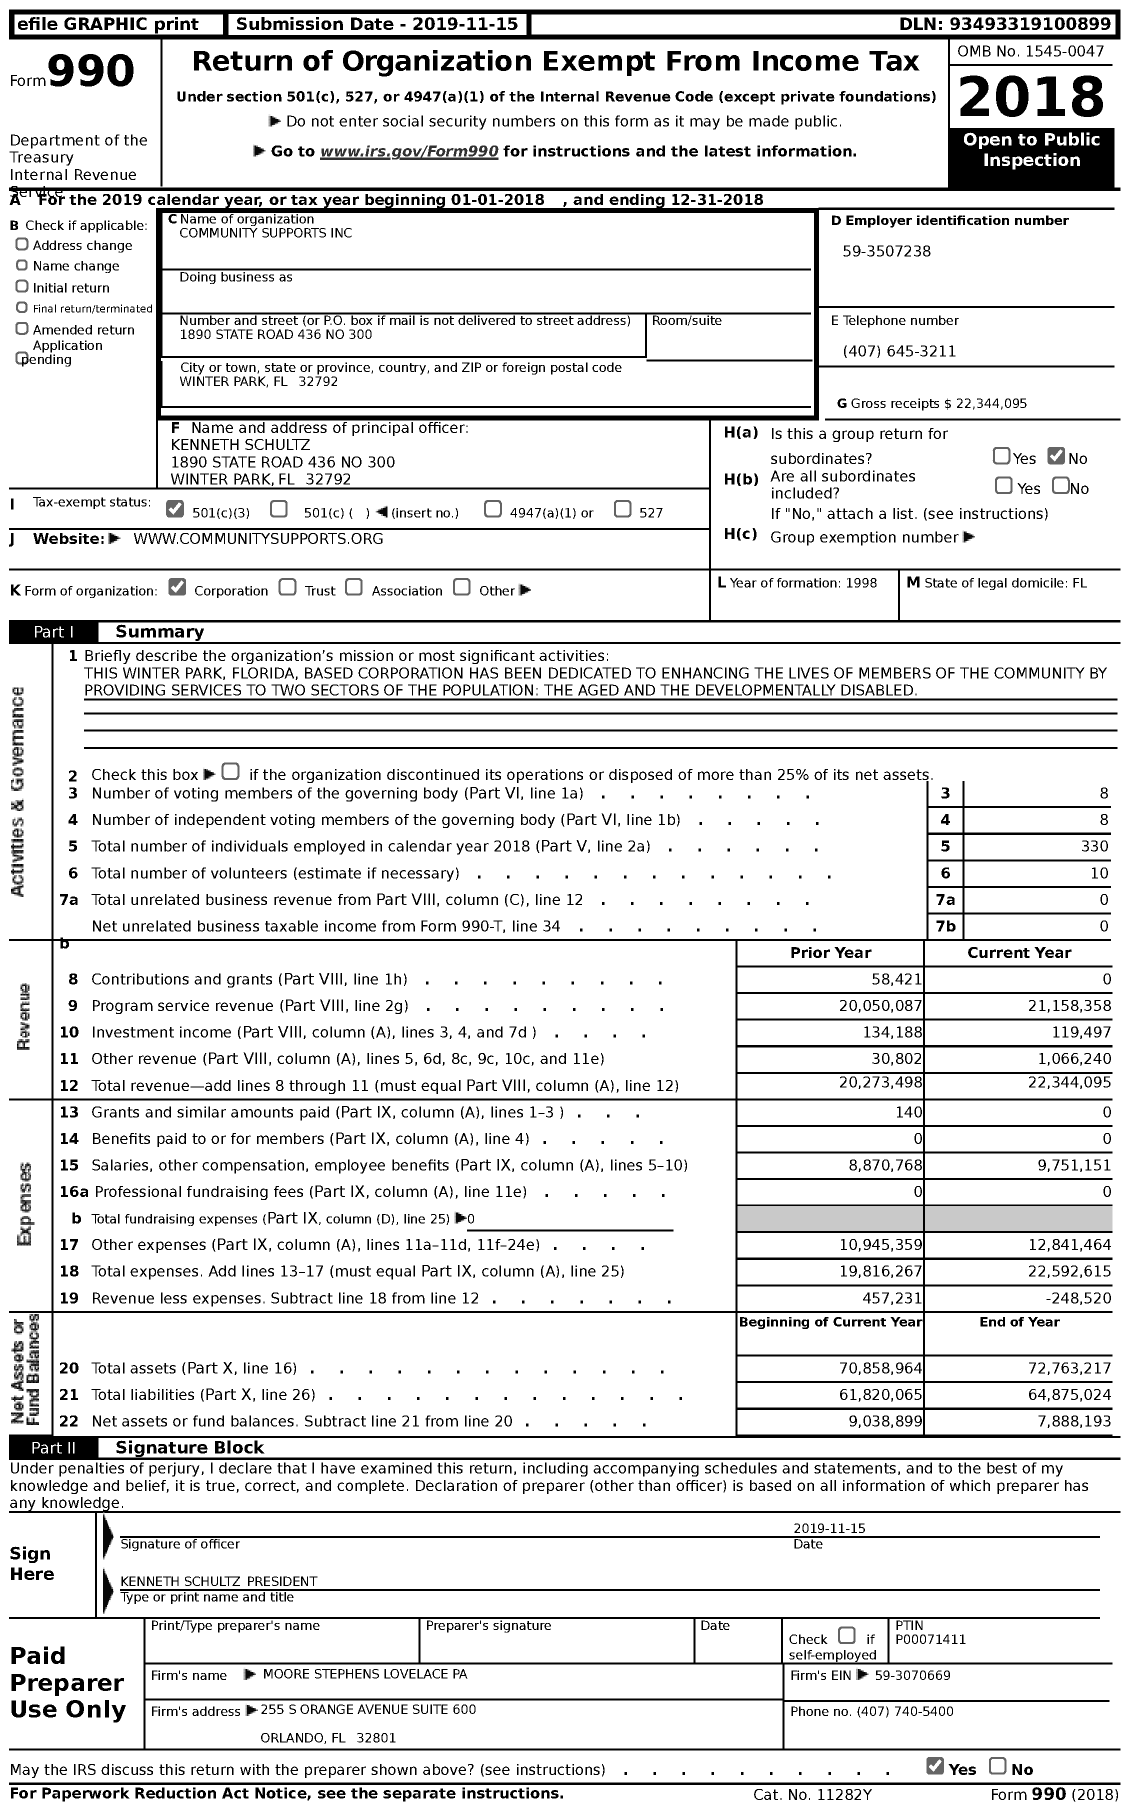 Image of first page of 2018 Form 990 for Community Supports